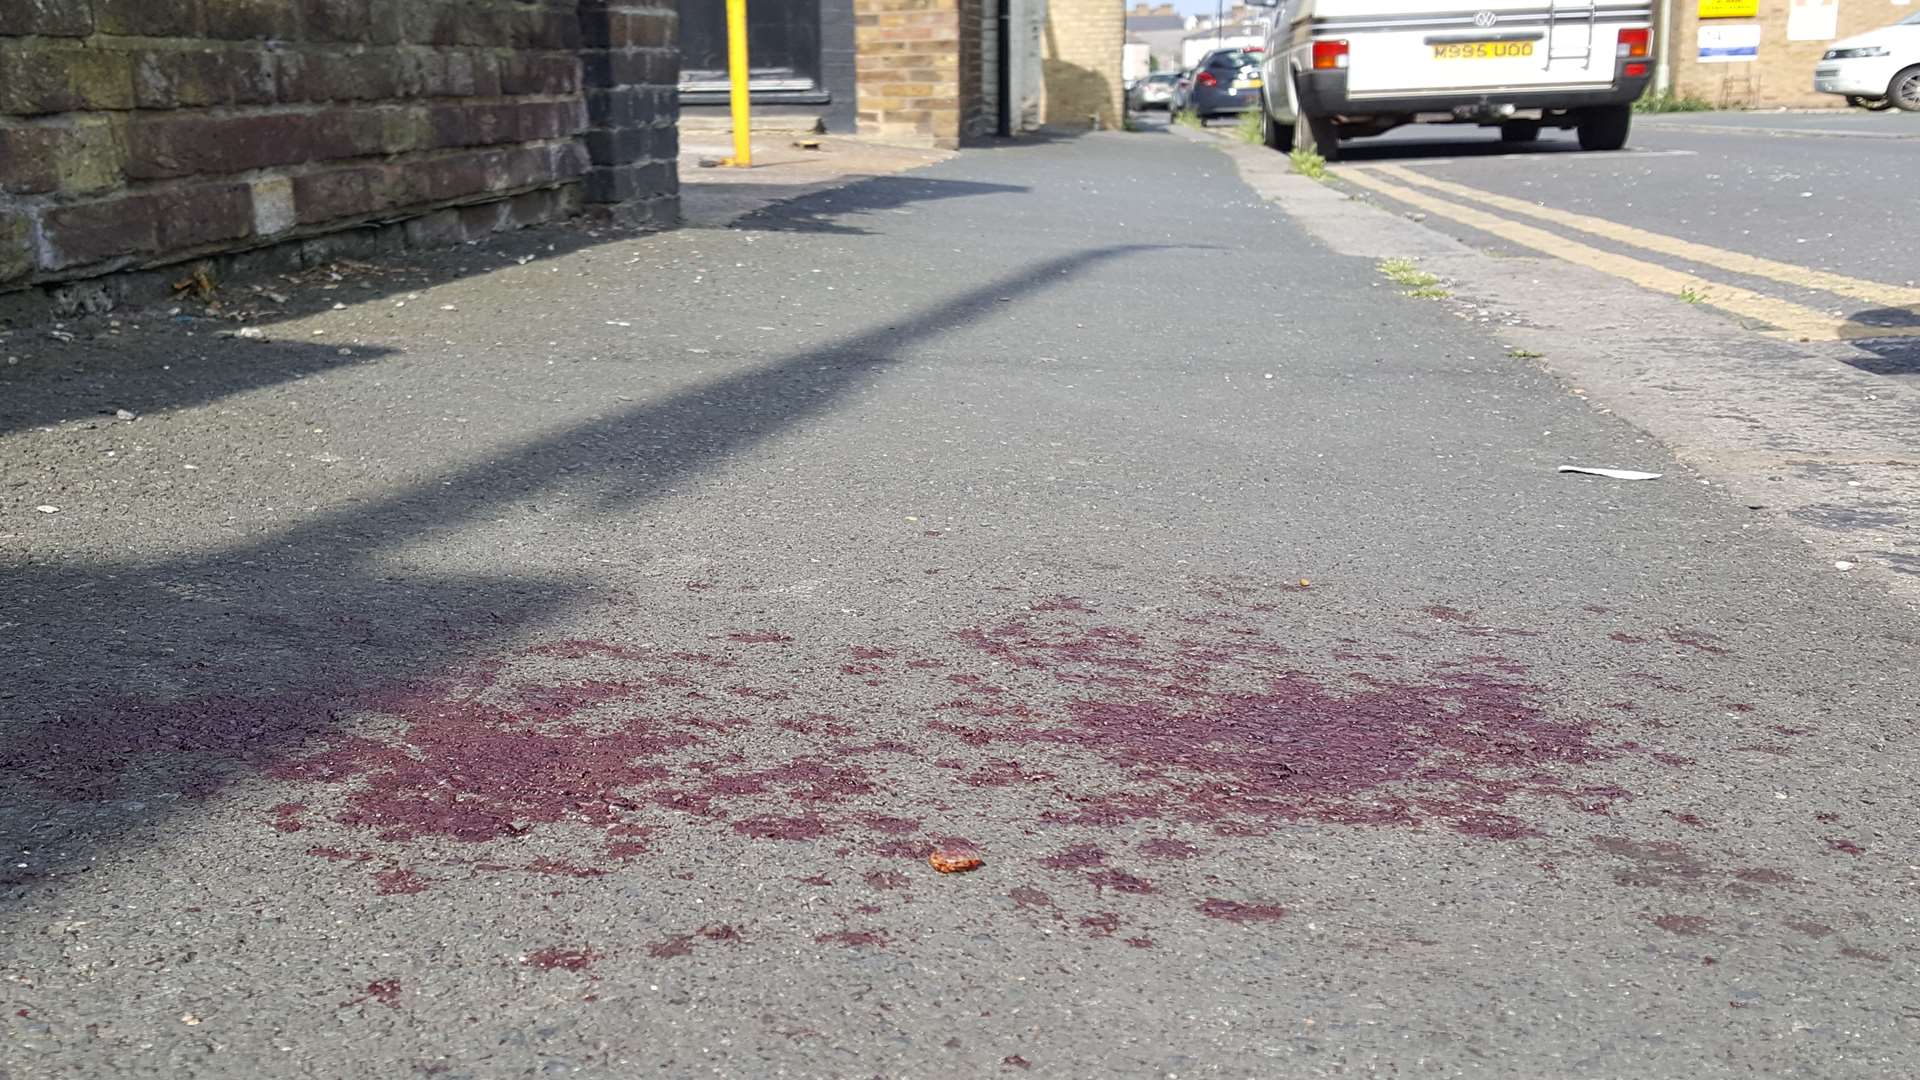 Blood on the pavement following the alleged attack